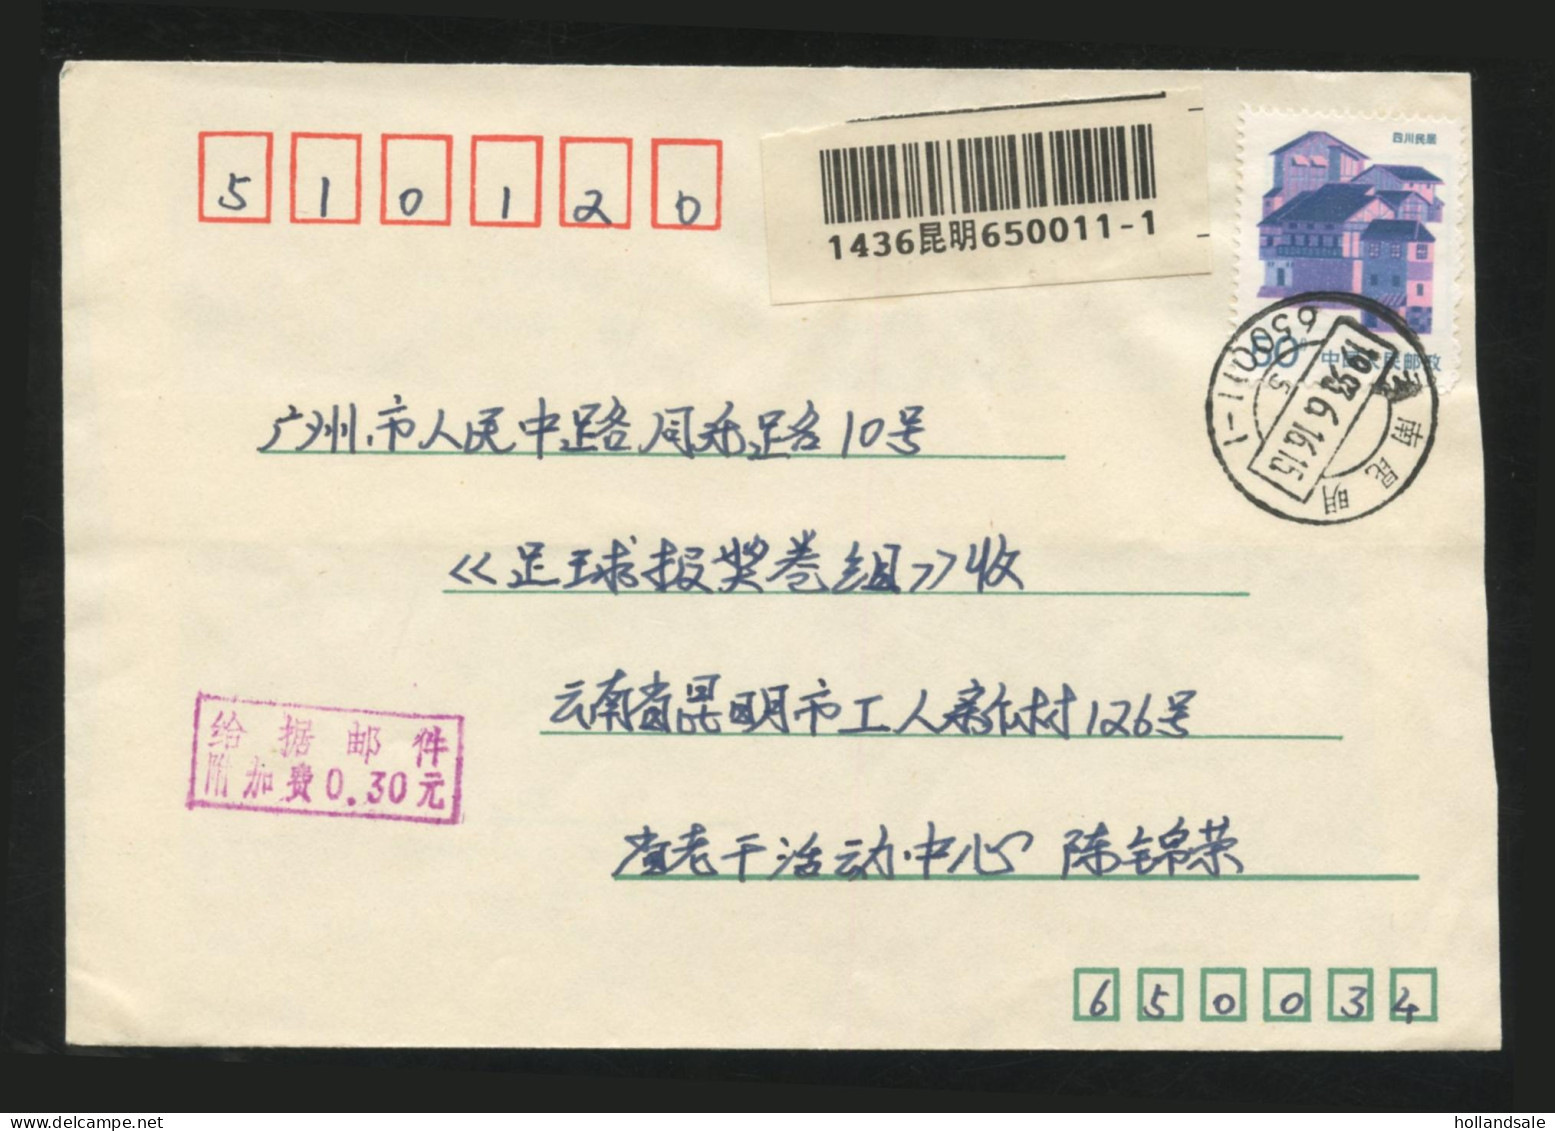 CHINA PRC / ADDED CHARGE - Cover Sent From Kunming To Guangzhou. Violet 30f AC Chop. - Impuestos